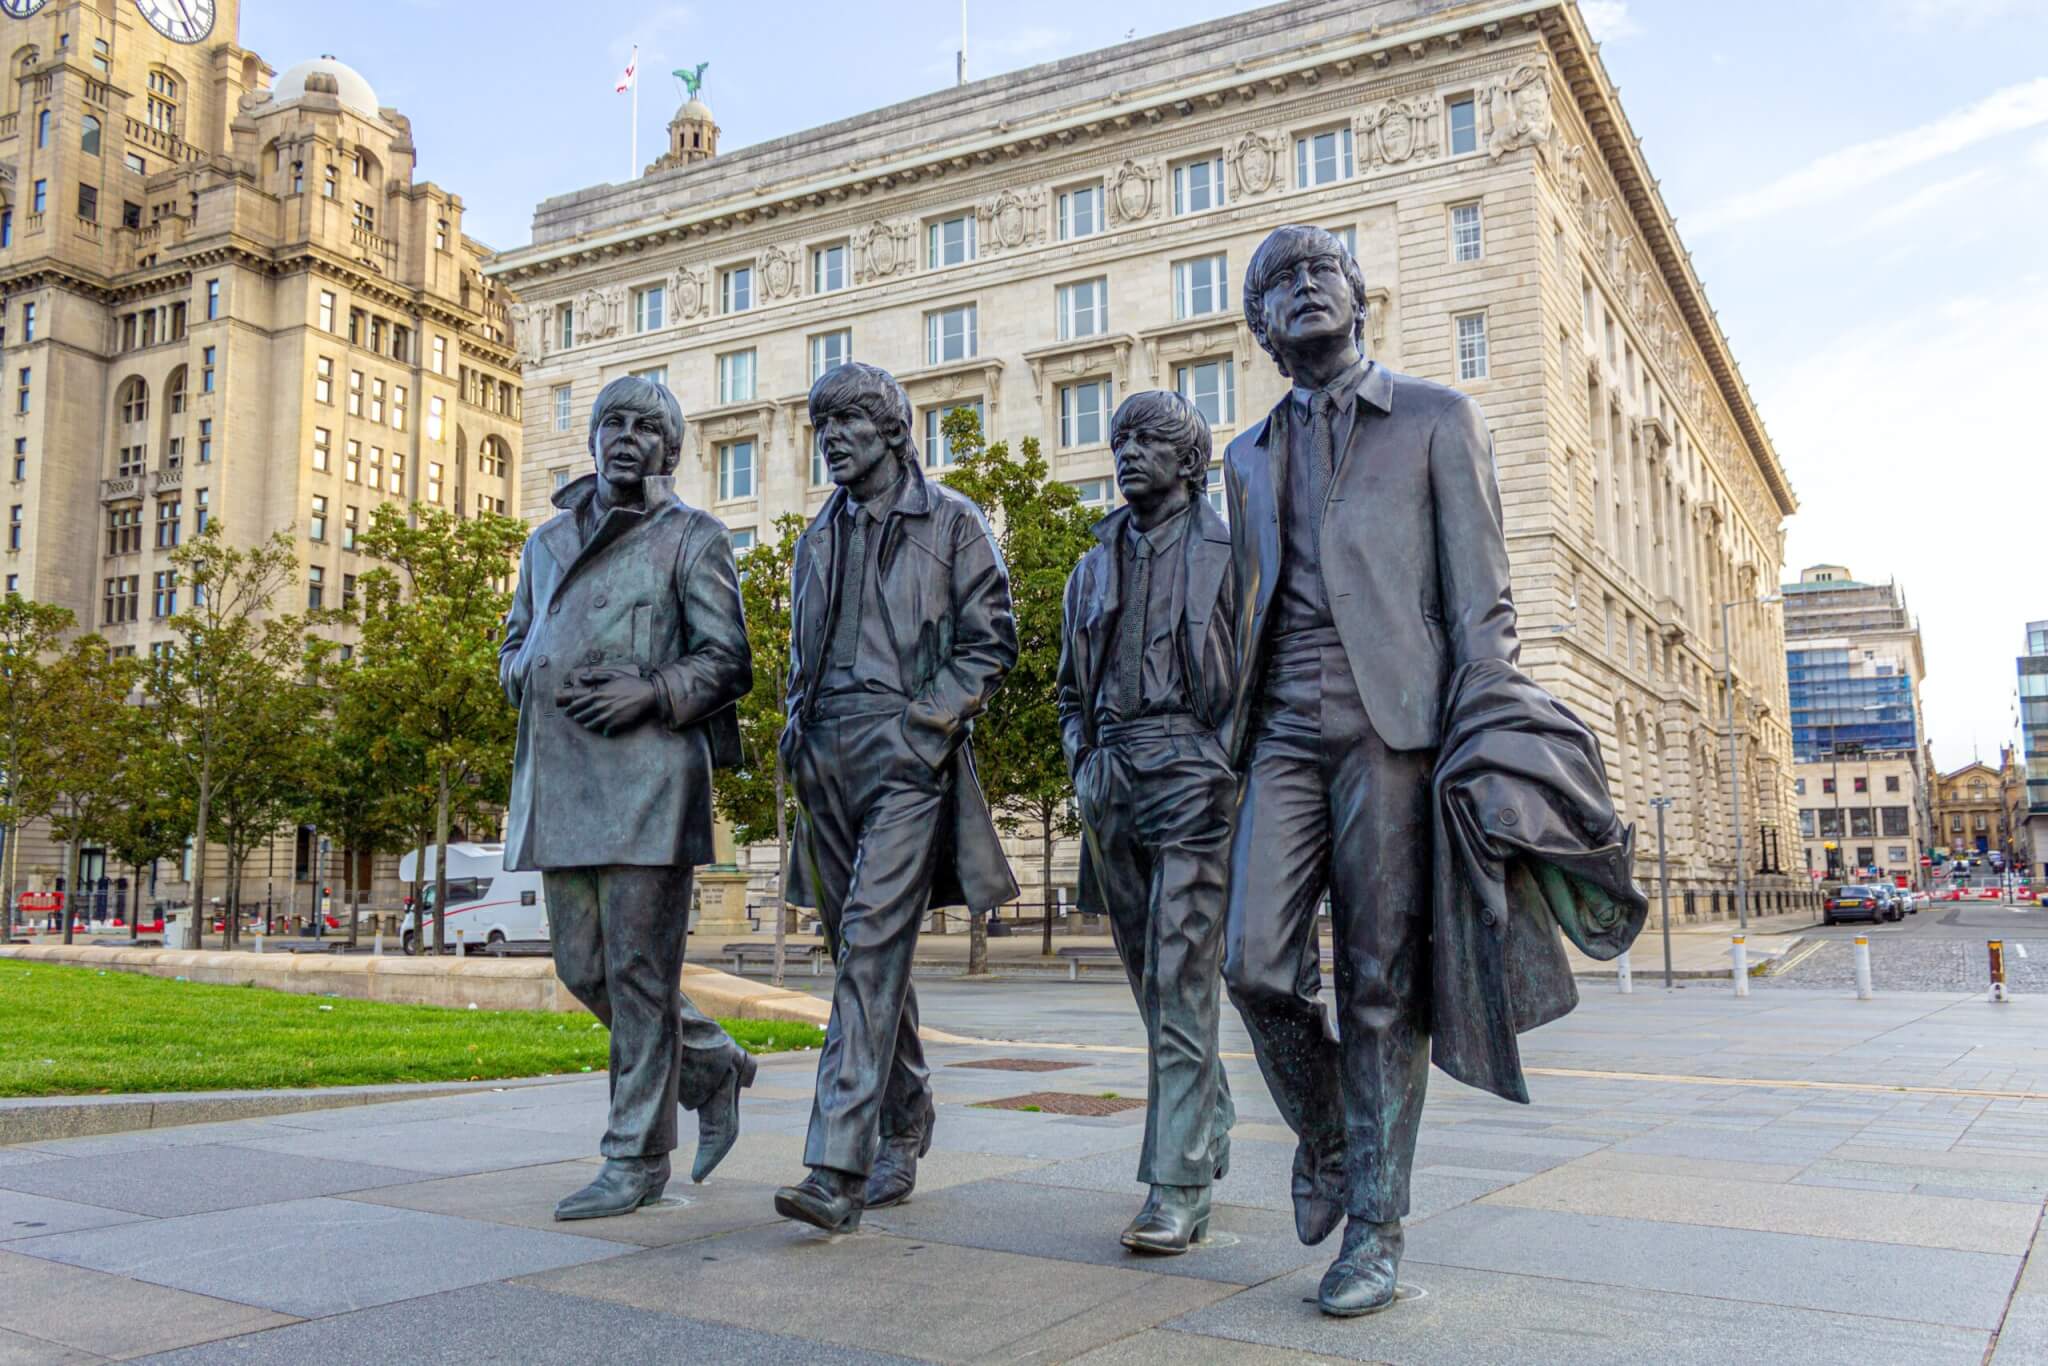 sculpture of the Beatles